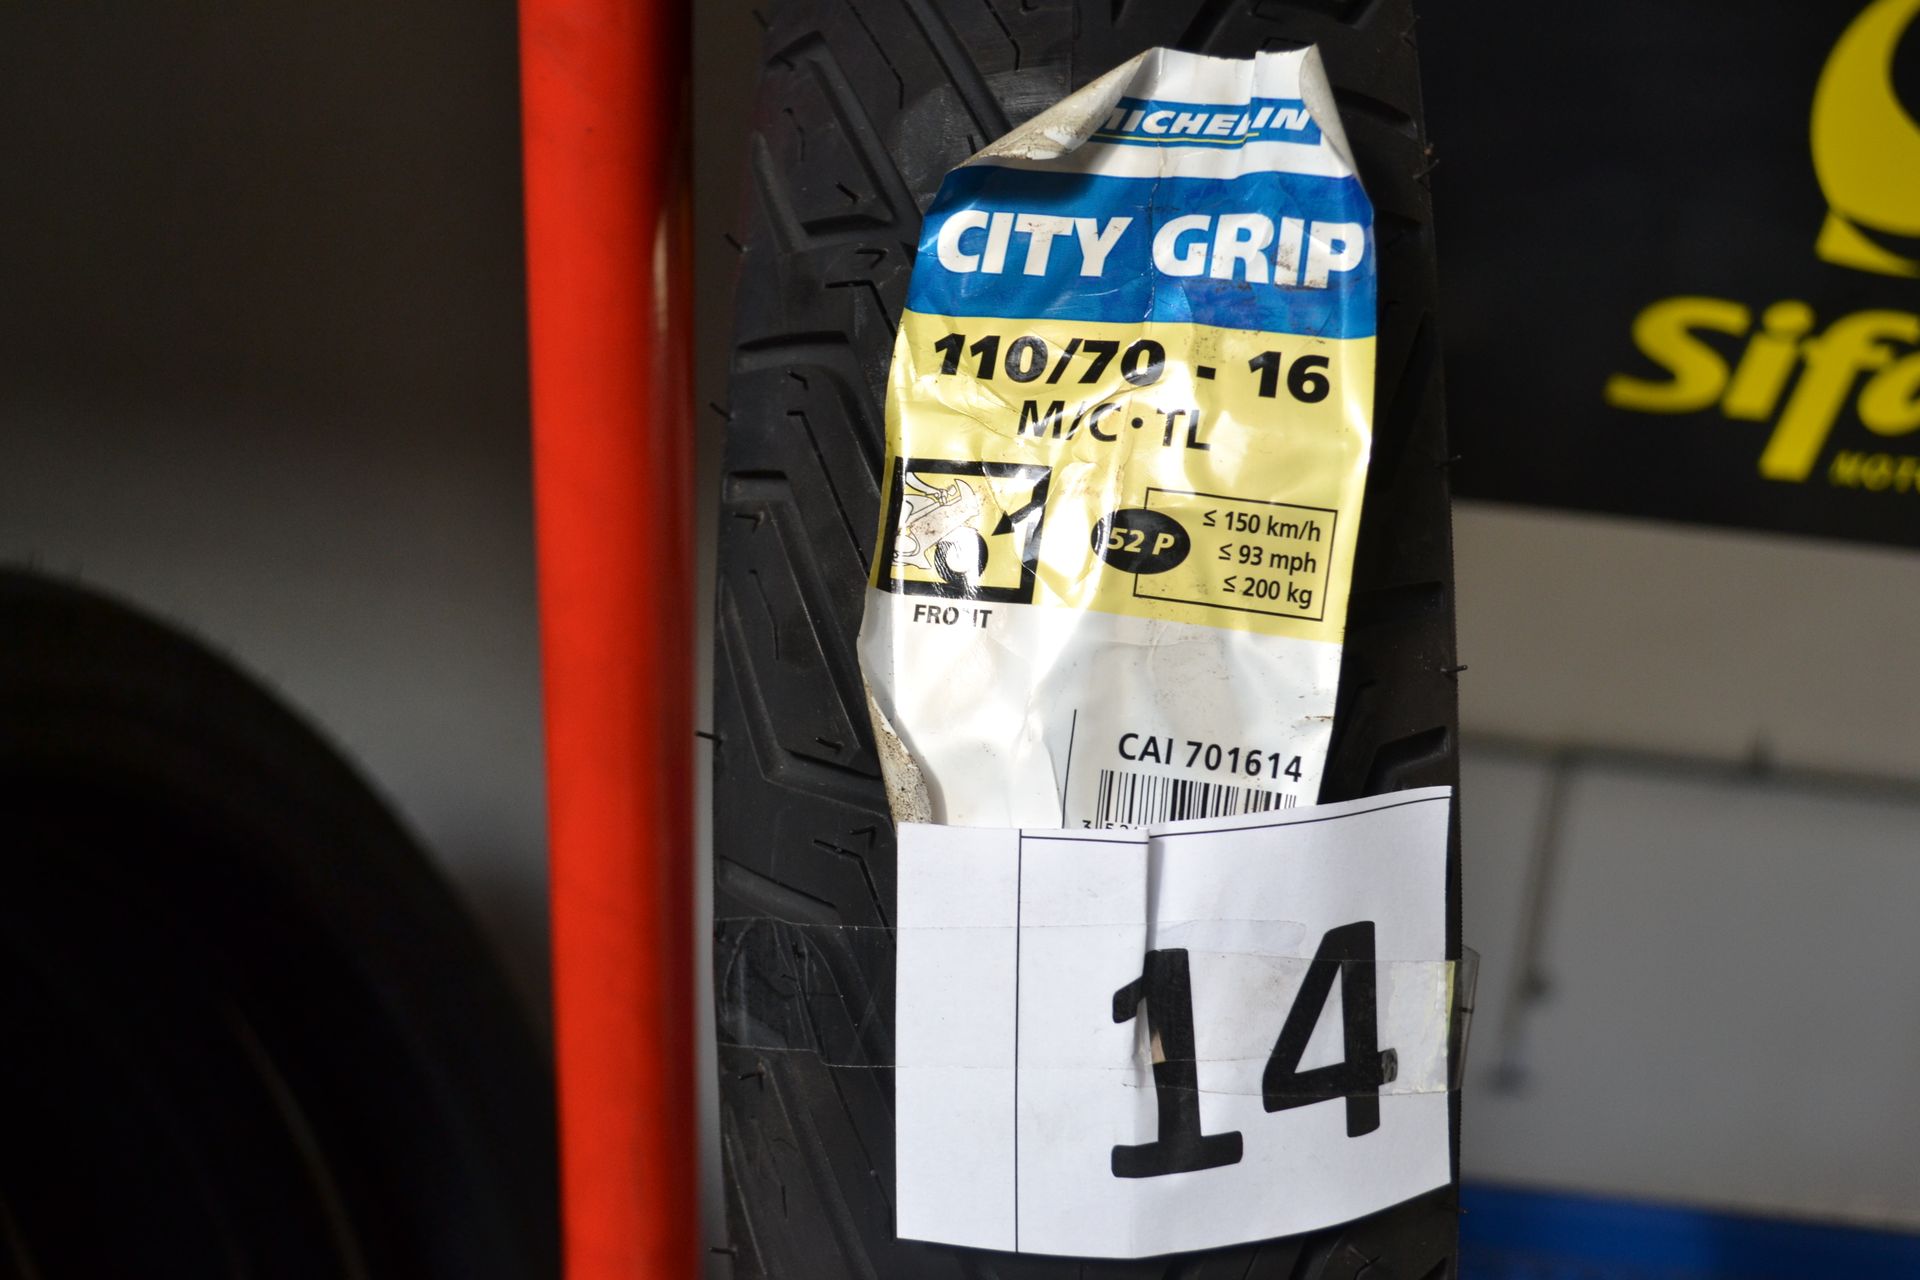 Null MICHELIN CITY GRIP tire, 110*70*R16, year of manufacture 2016